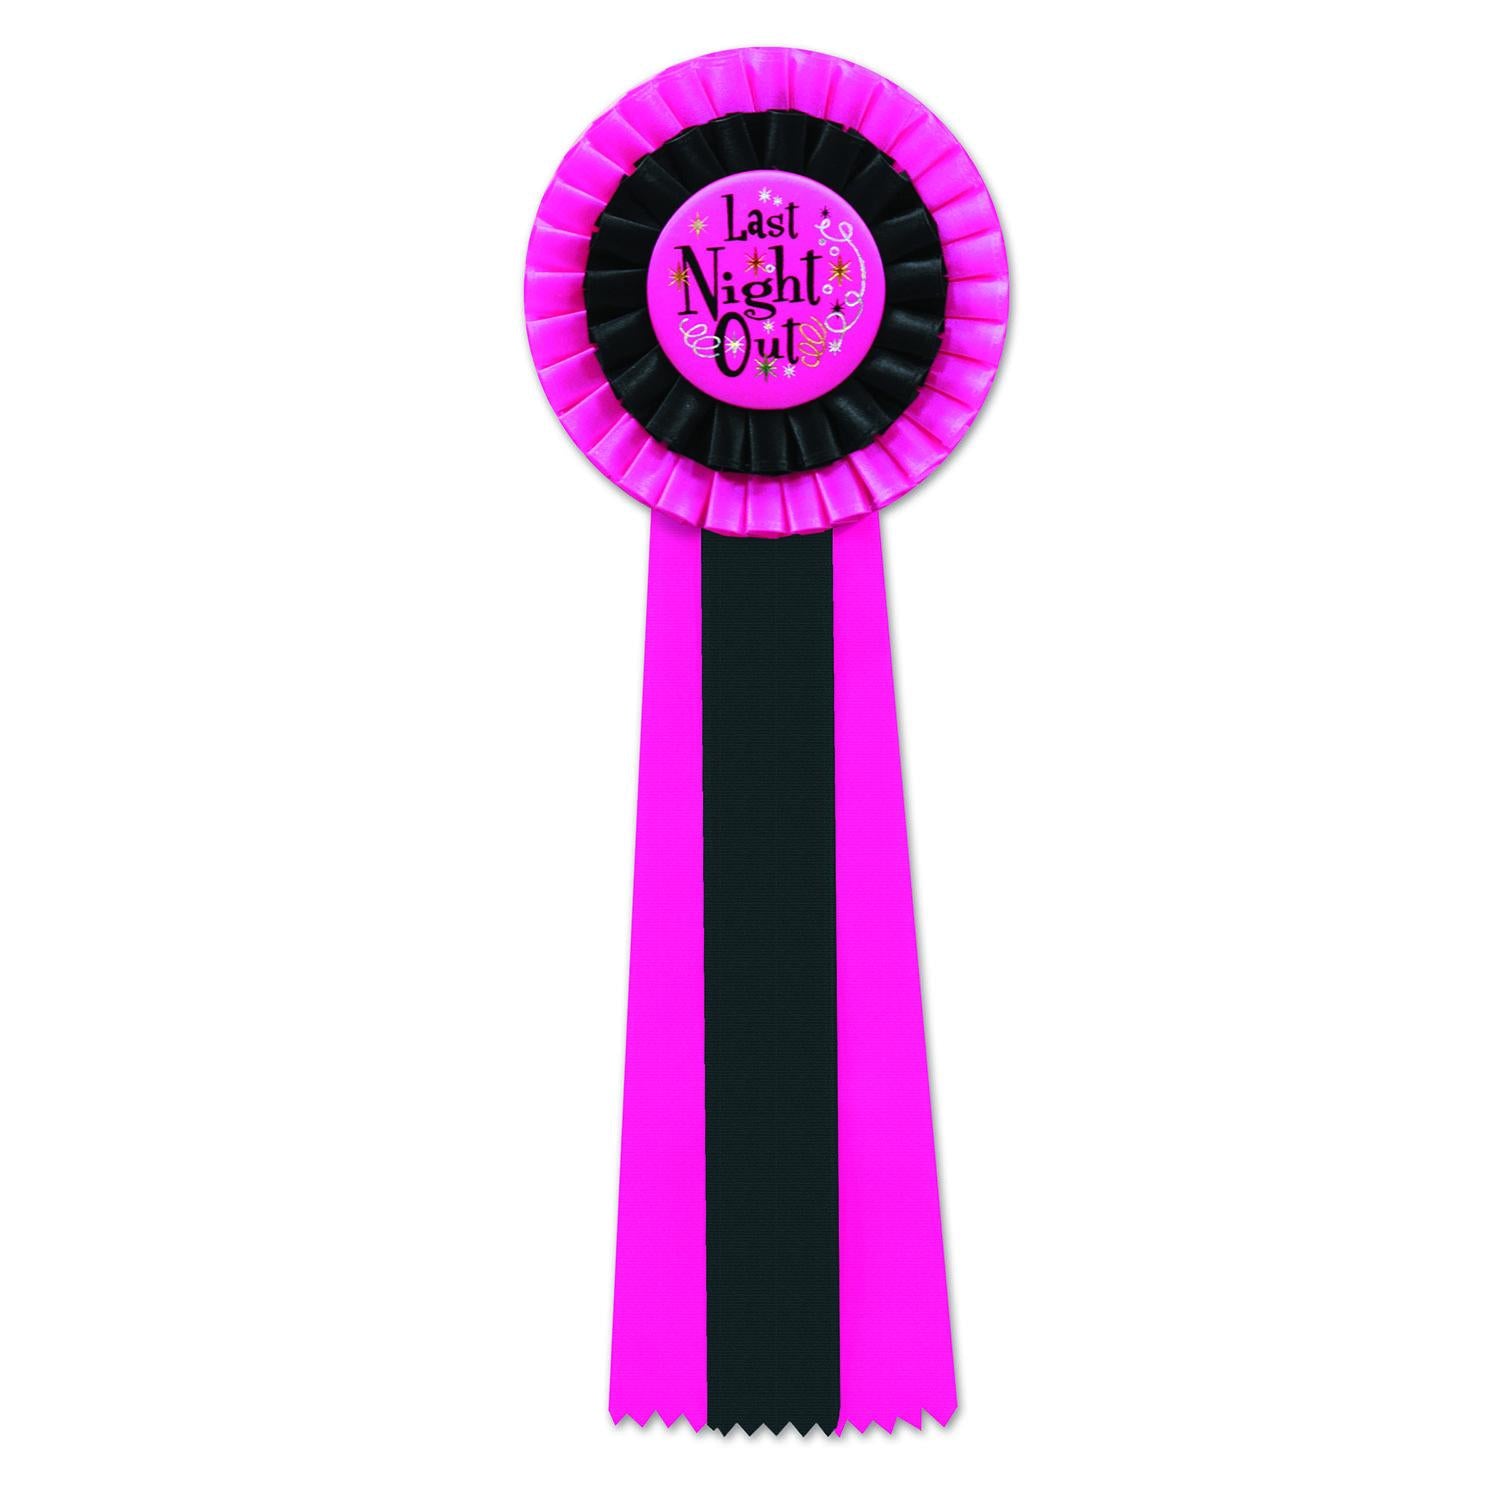 Beistle Bachelorette Party Last Night Out Deluxe Rosette